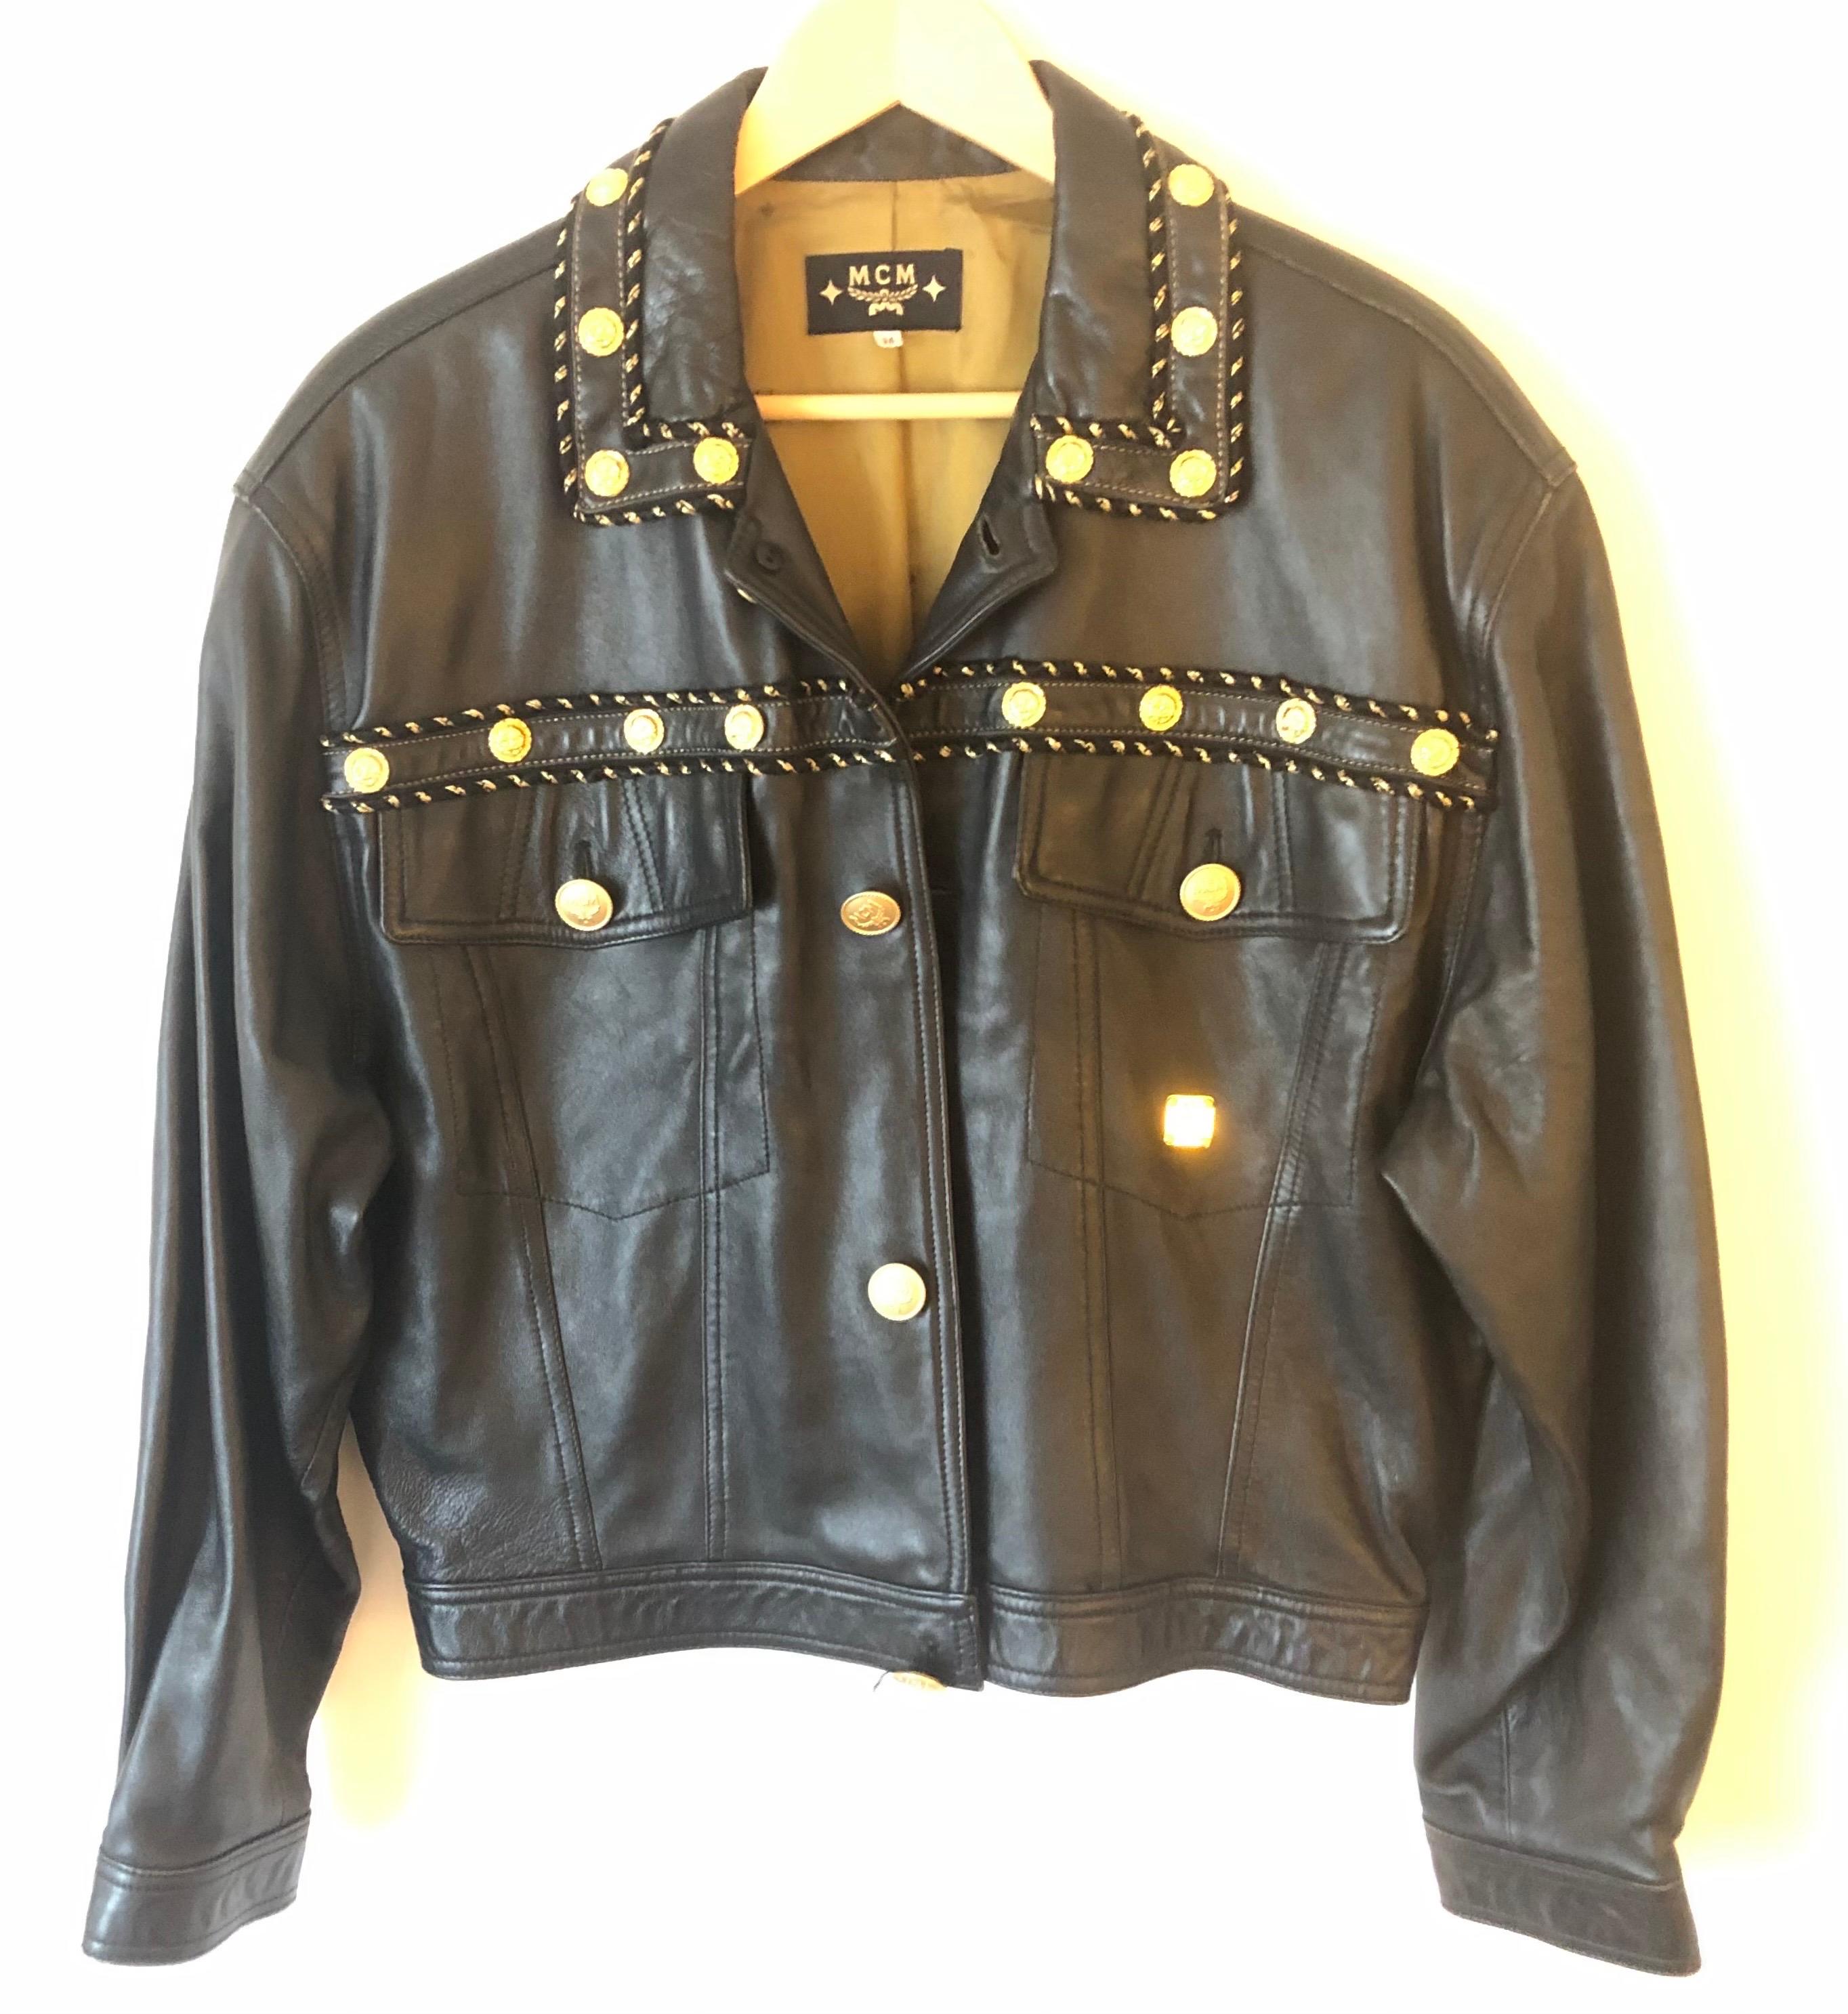 Gorgeous vintage MCM black leather jacket with gold plate and buttons.